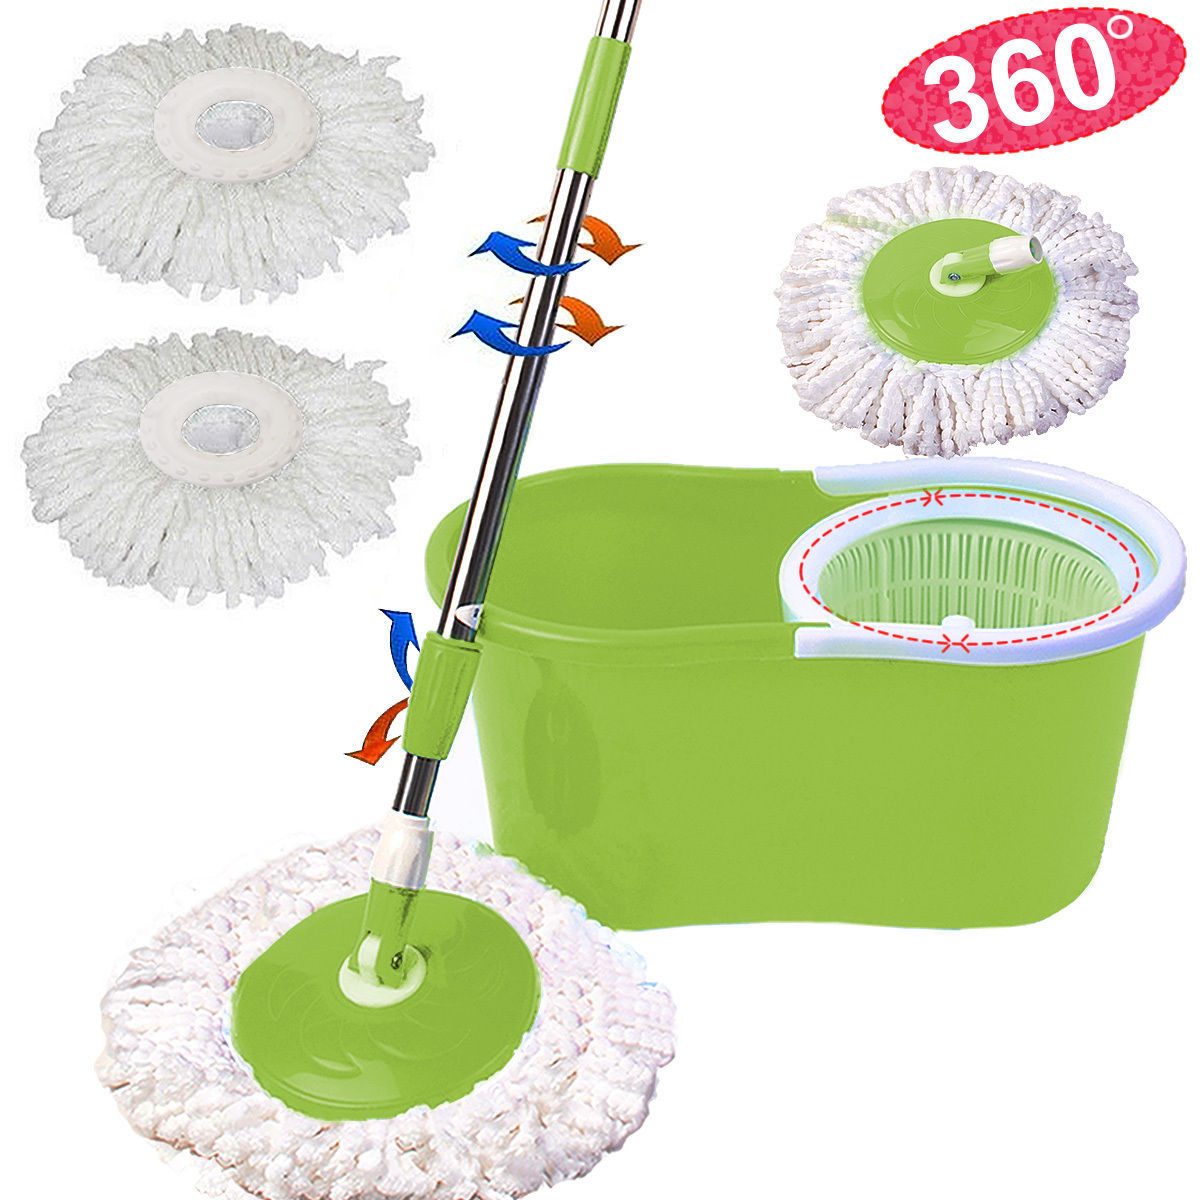 Zimtown Microfiber Spin Mop wi...